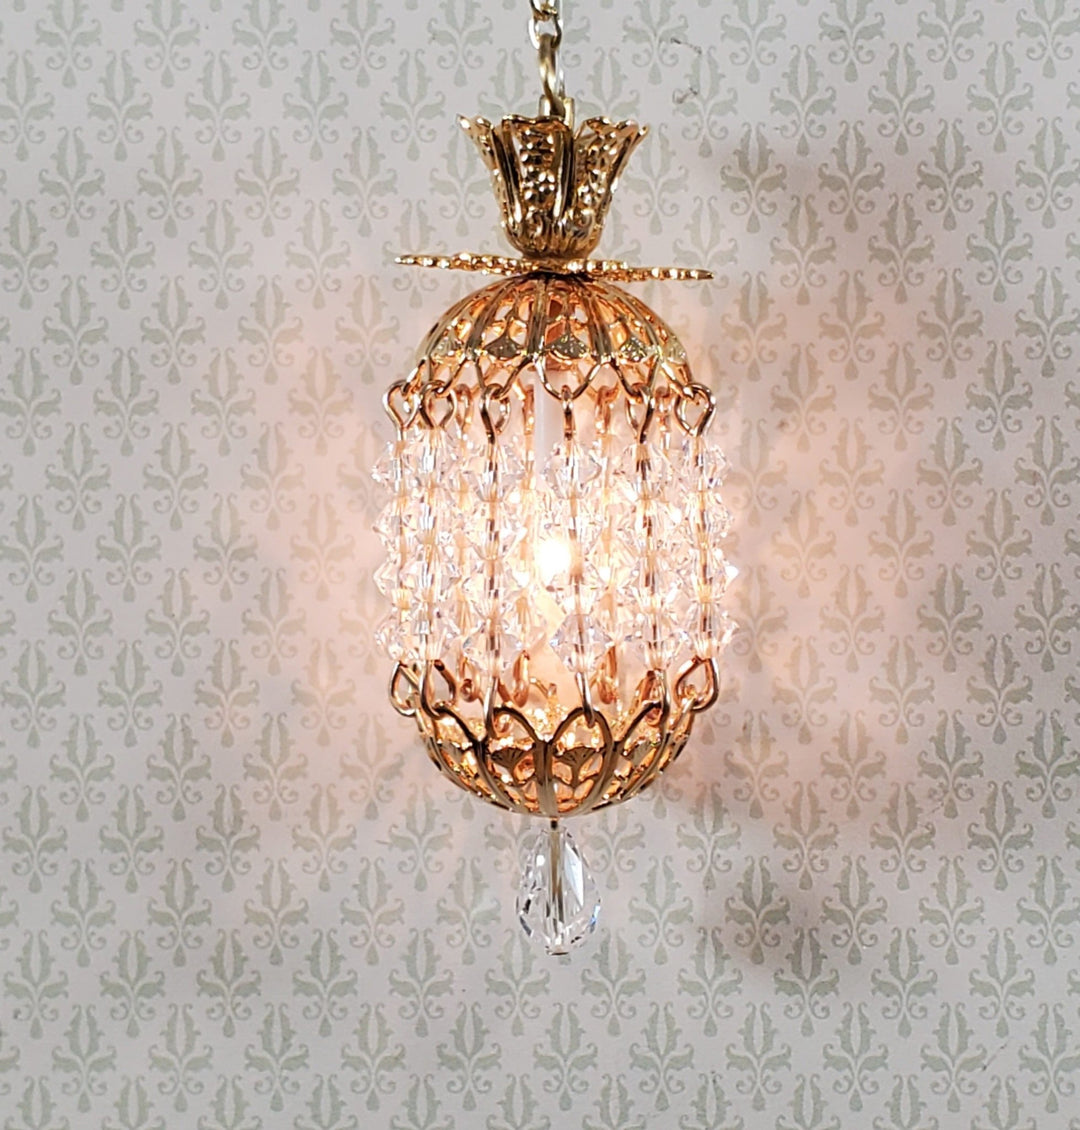 Dollhouse Ceiling Light Real Glass Crystals "Pineapple Lamp" 12 Volt 1:12 Scale - Miniature Crush